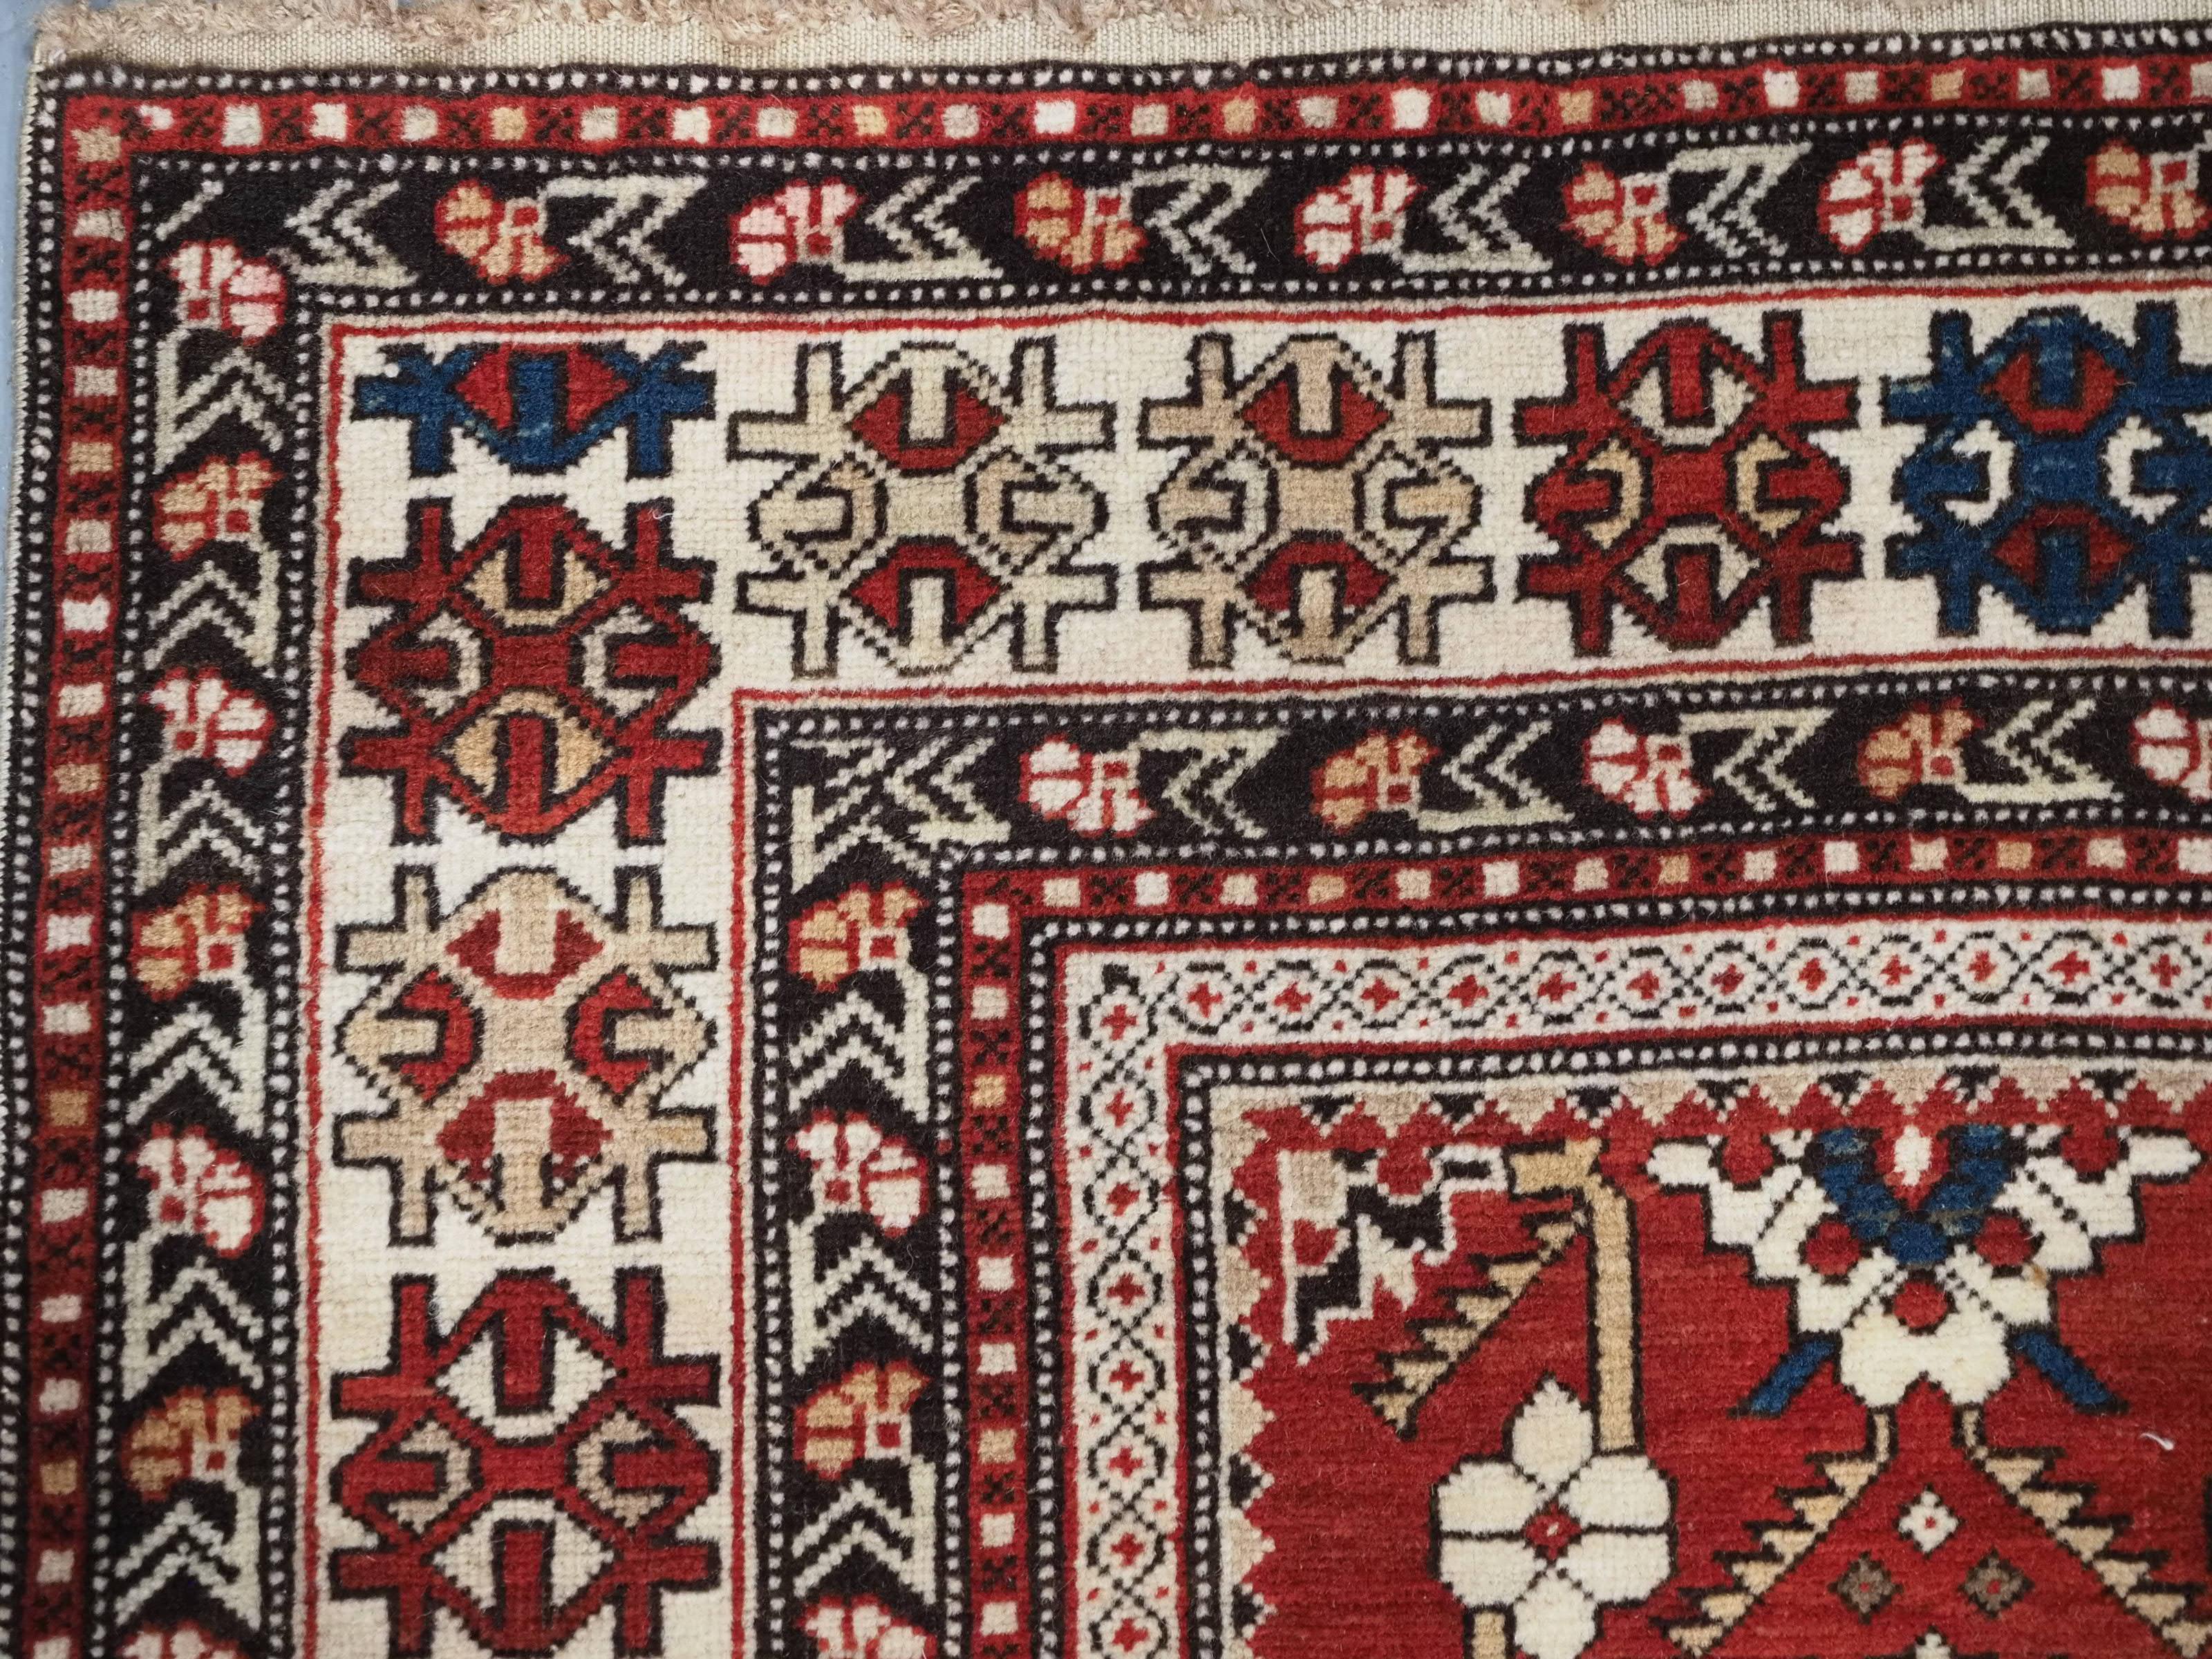 Wool Antique South East Caucasian Shirvan rug with bold floral lattice design. For Sale